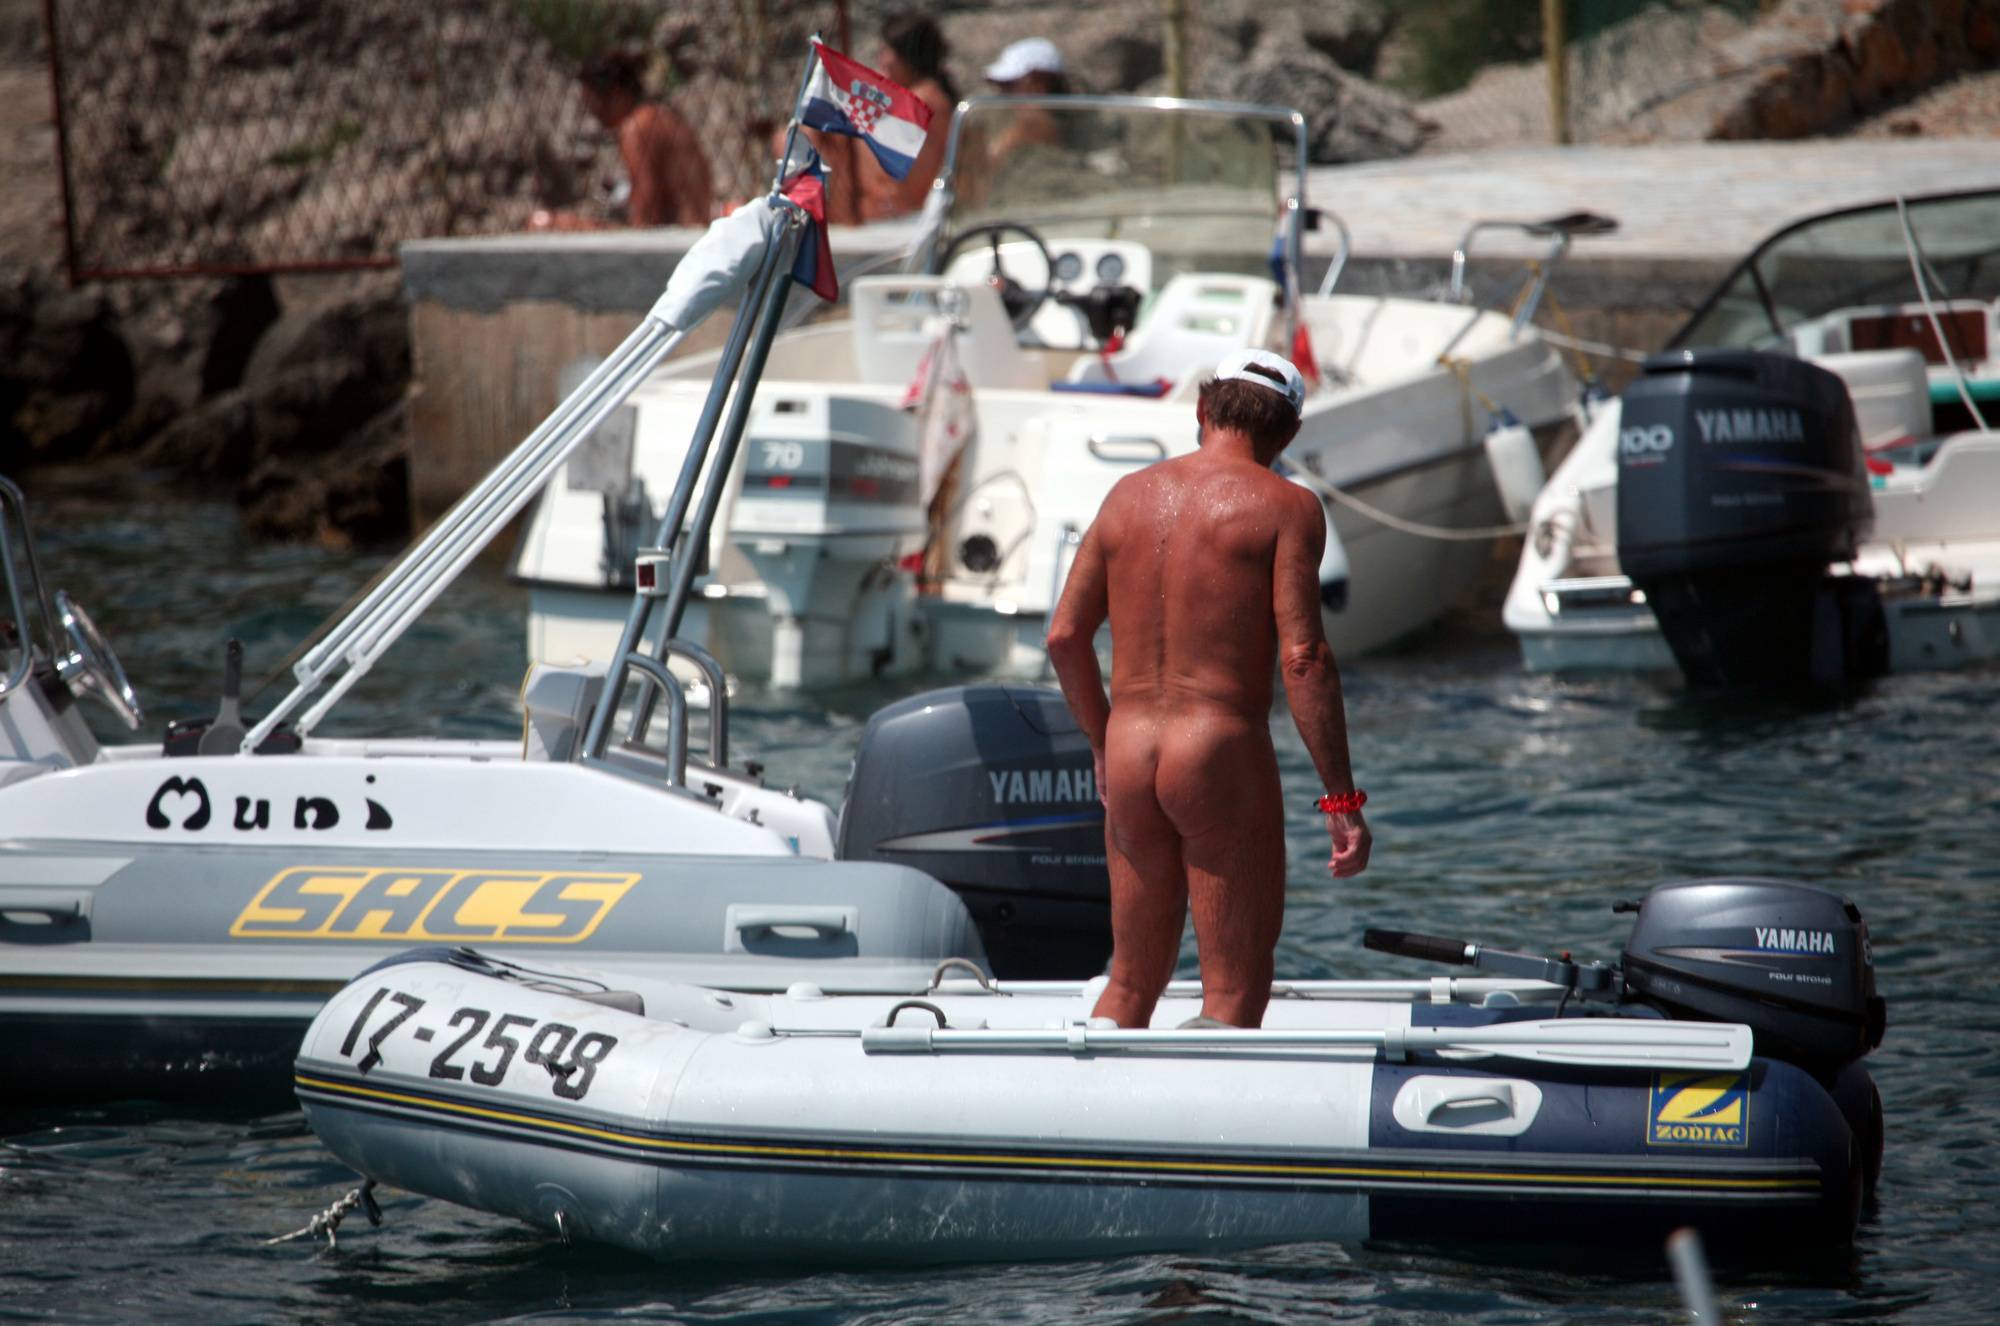 Nudism Life - Boating and Floater Waters